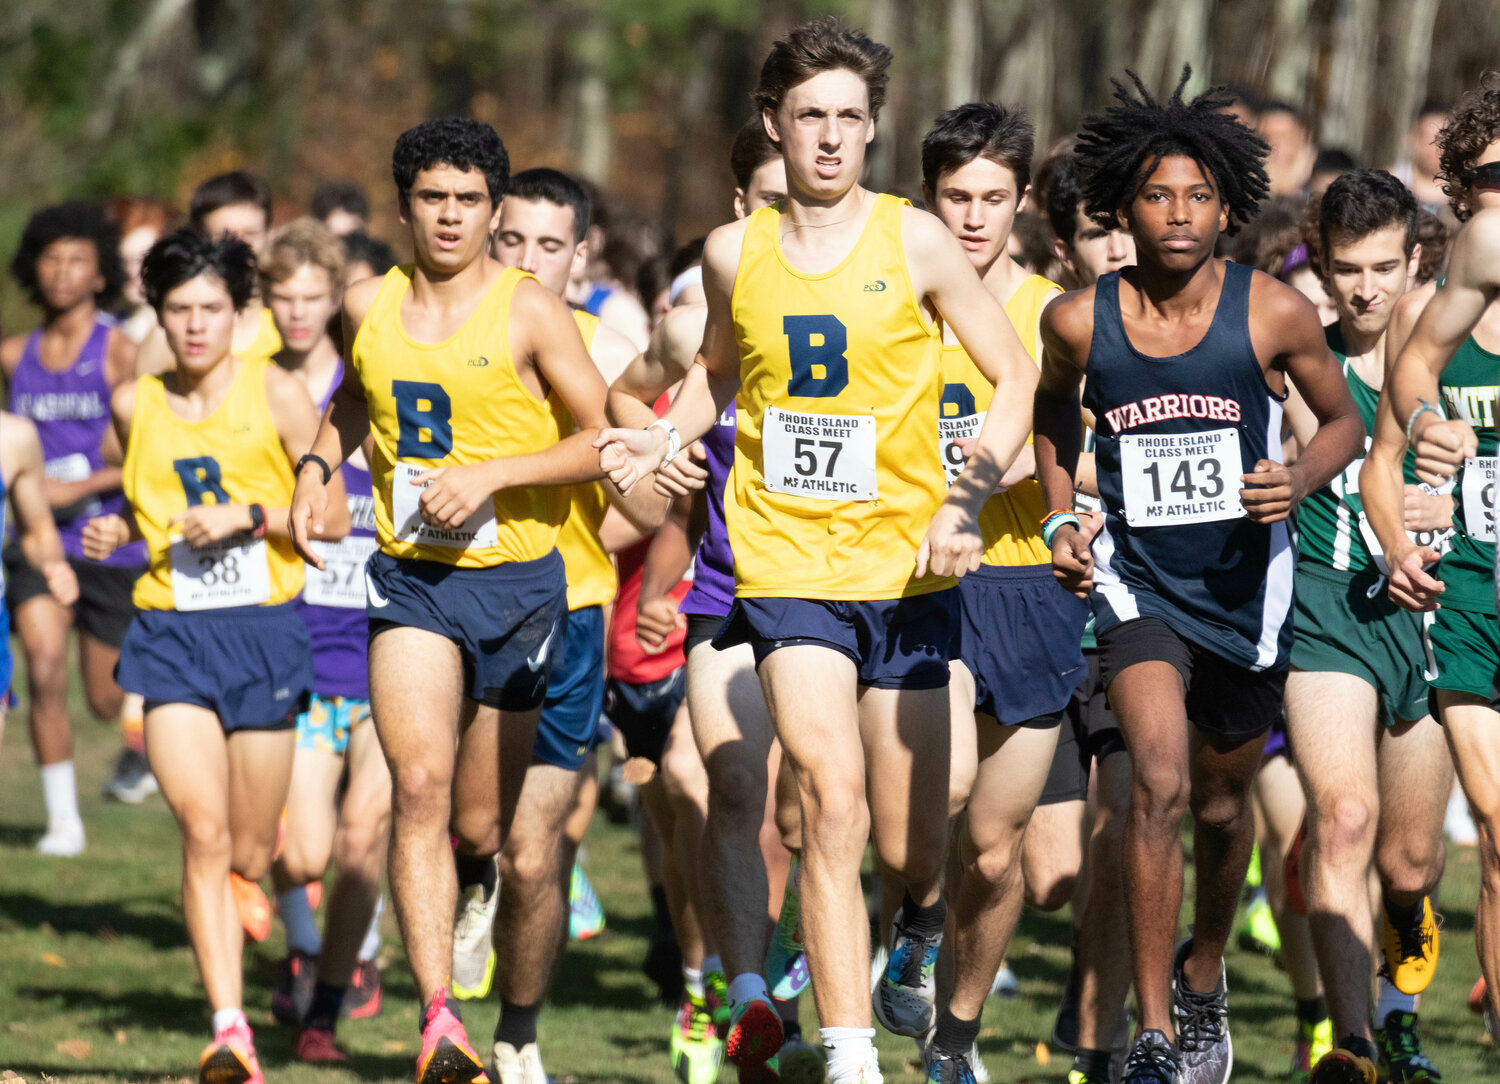 Barrington High School’s Michael Chun, Brandon Piedade and Myles Napolitano (from left to right) race in the Class B Championship on Saturday.